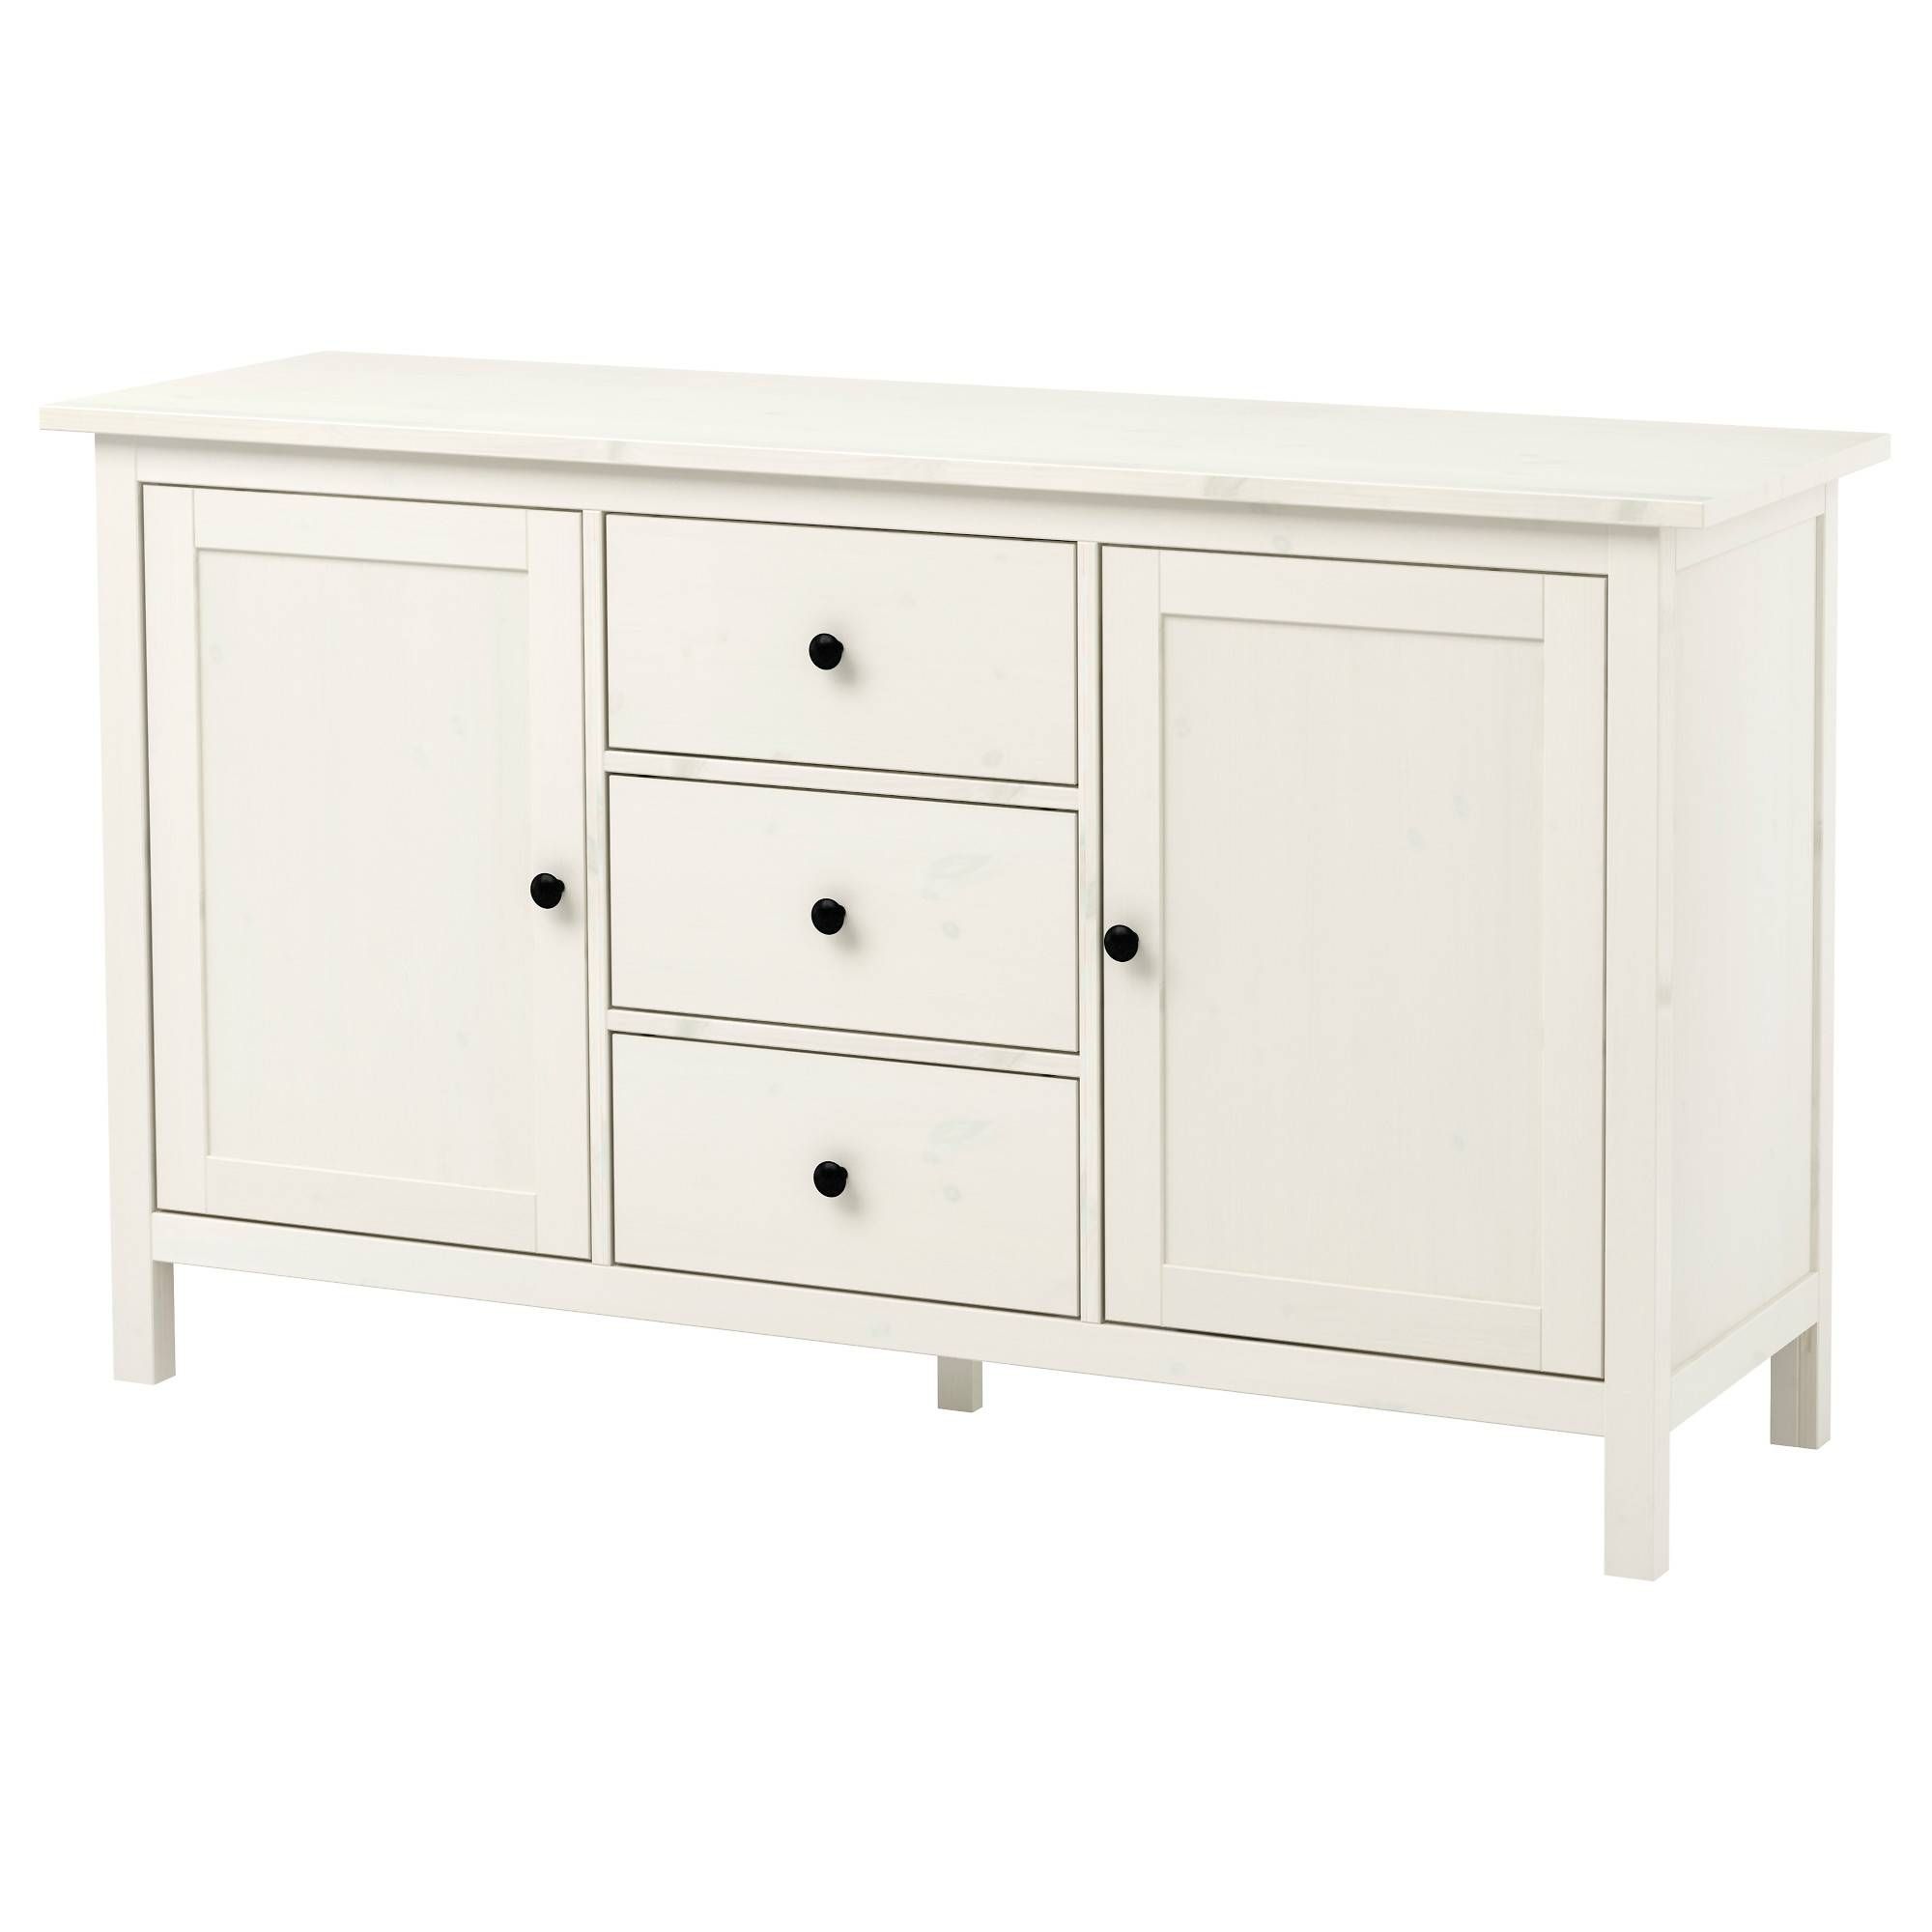 Sideboards & Buffet Cabinets | Ikea Intended For White Kitchen Sideboards (View 10 of 30)